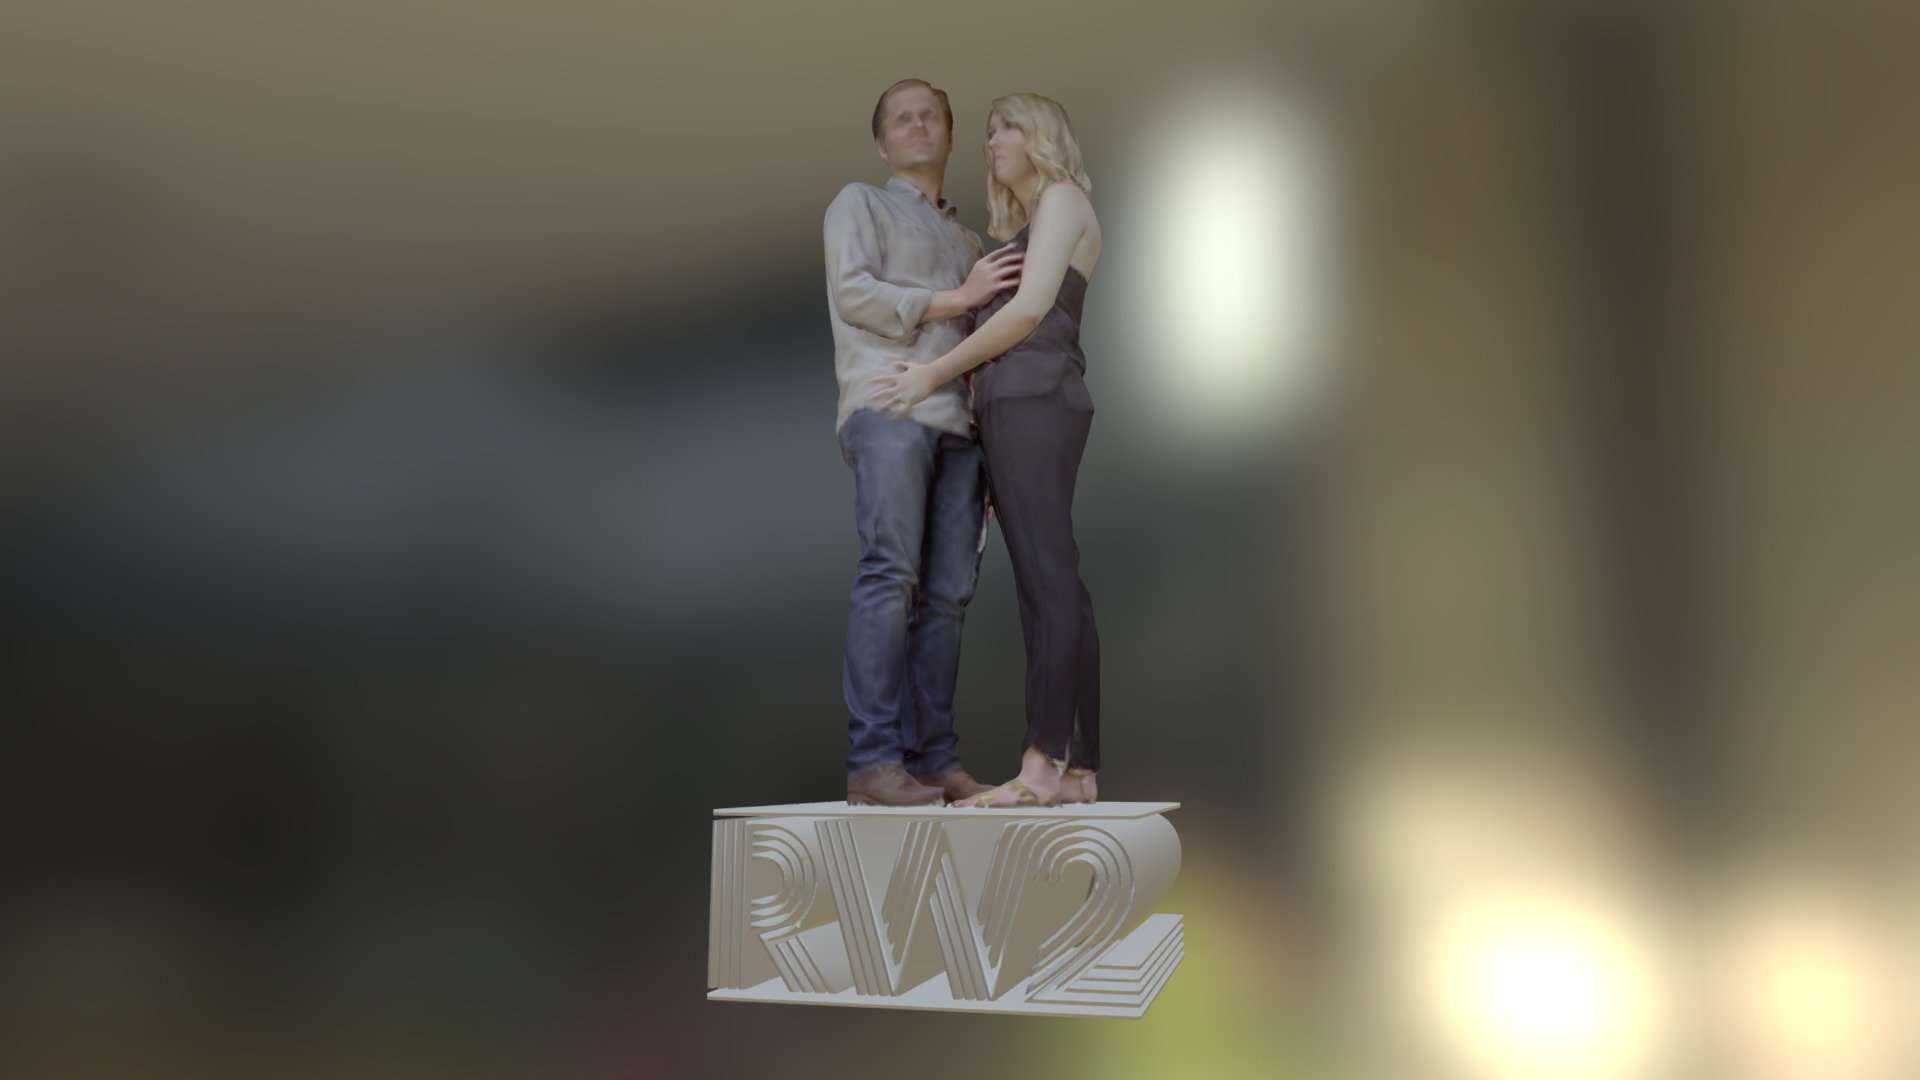 RW2 Relaunch Party Scan-a-thon - Couple 2 - 3D model by RW2_productions (@rw2productions) 3d model